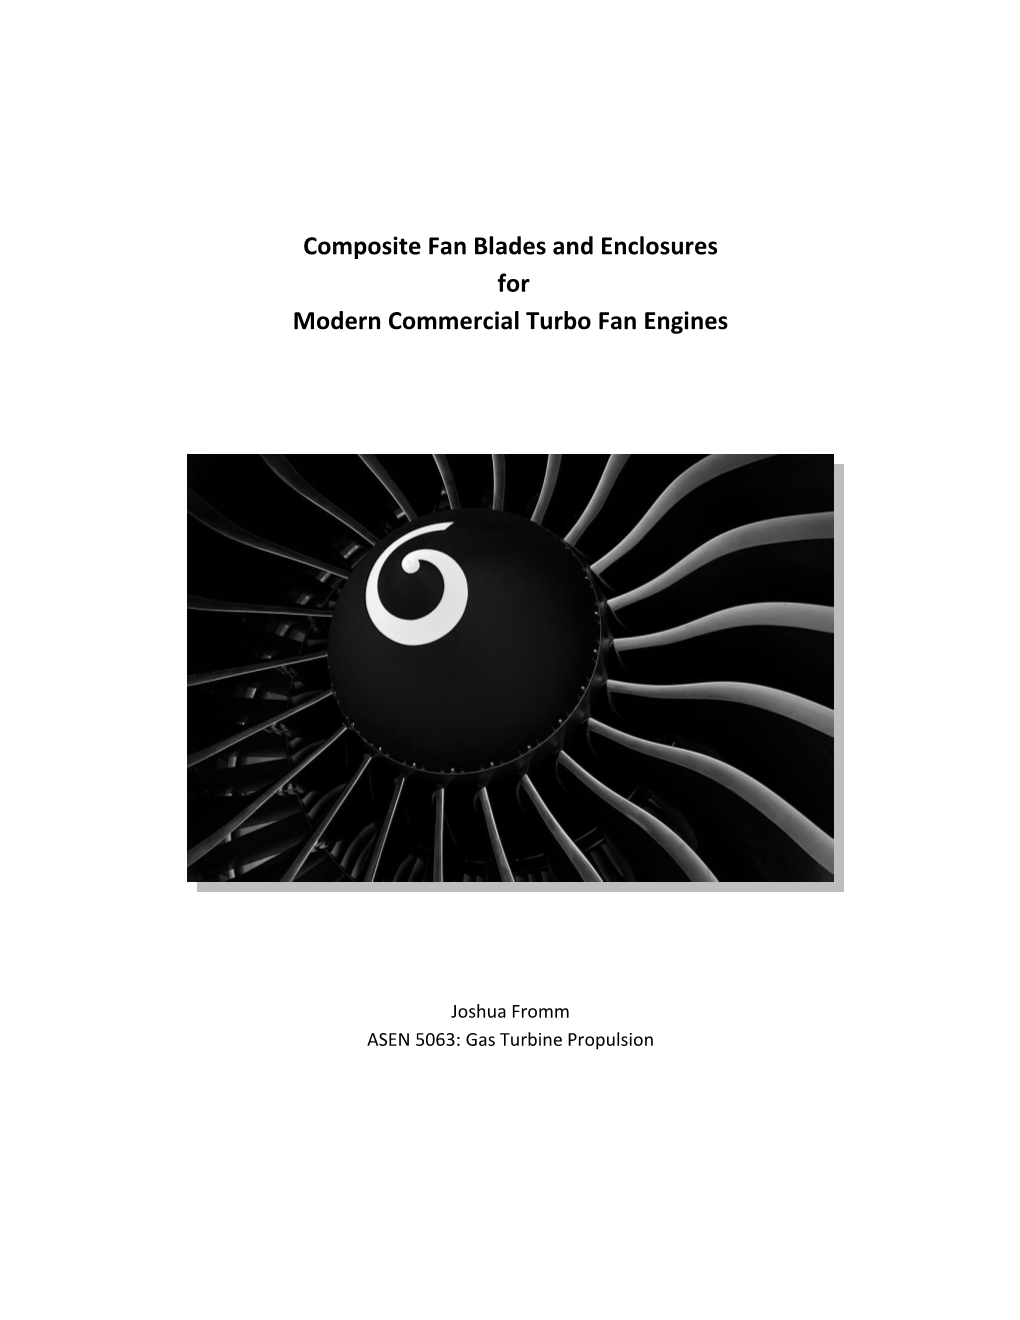 Composite Fan Blades and Enclosures for Modern Commercial Turbo Fan Engines